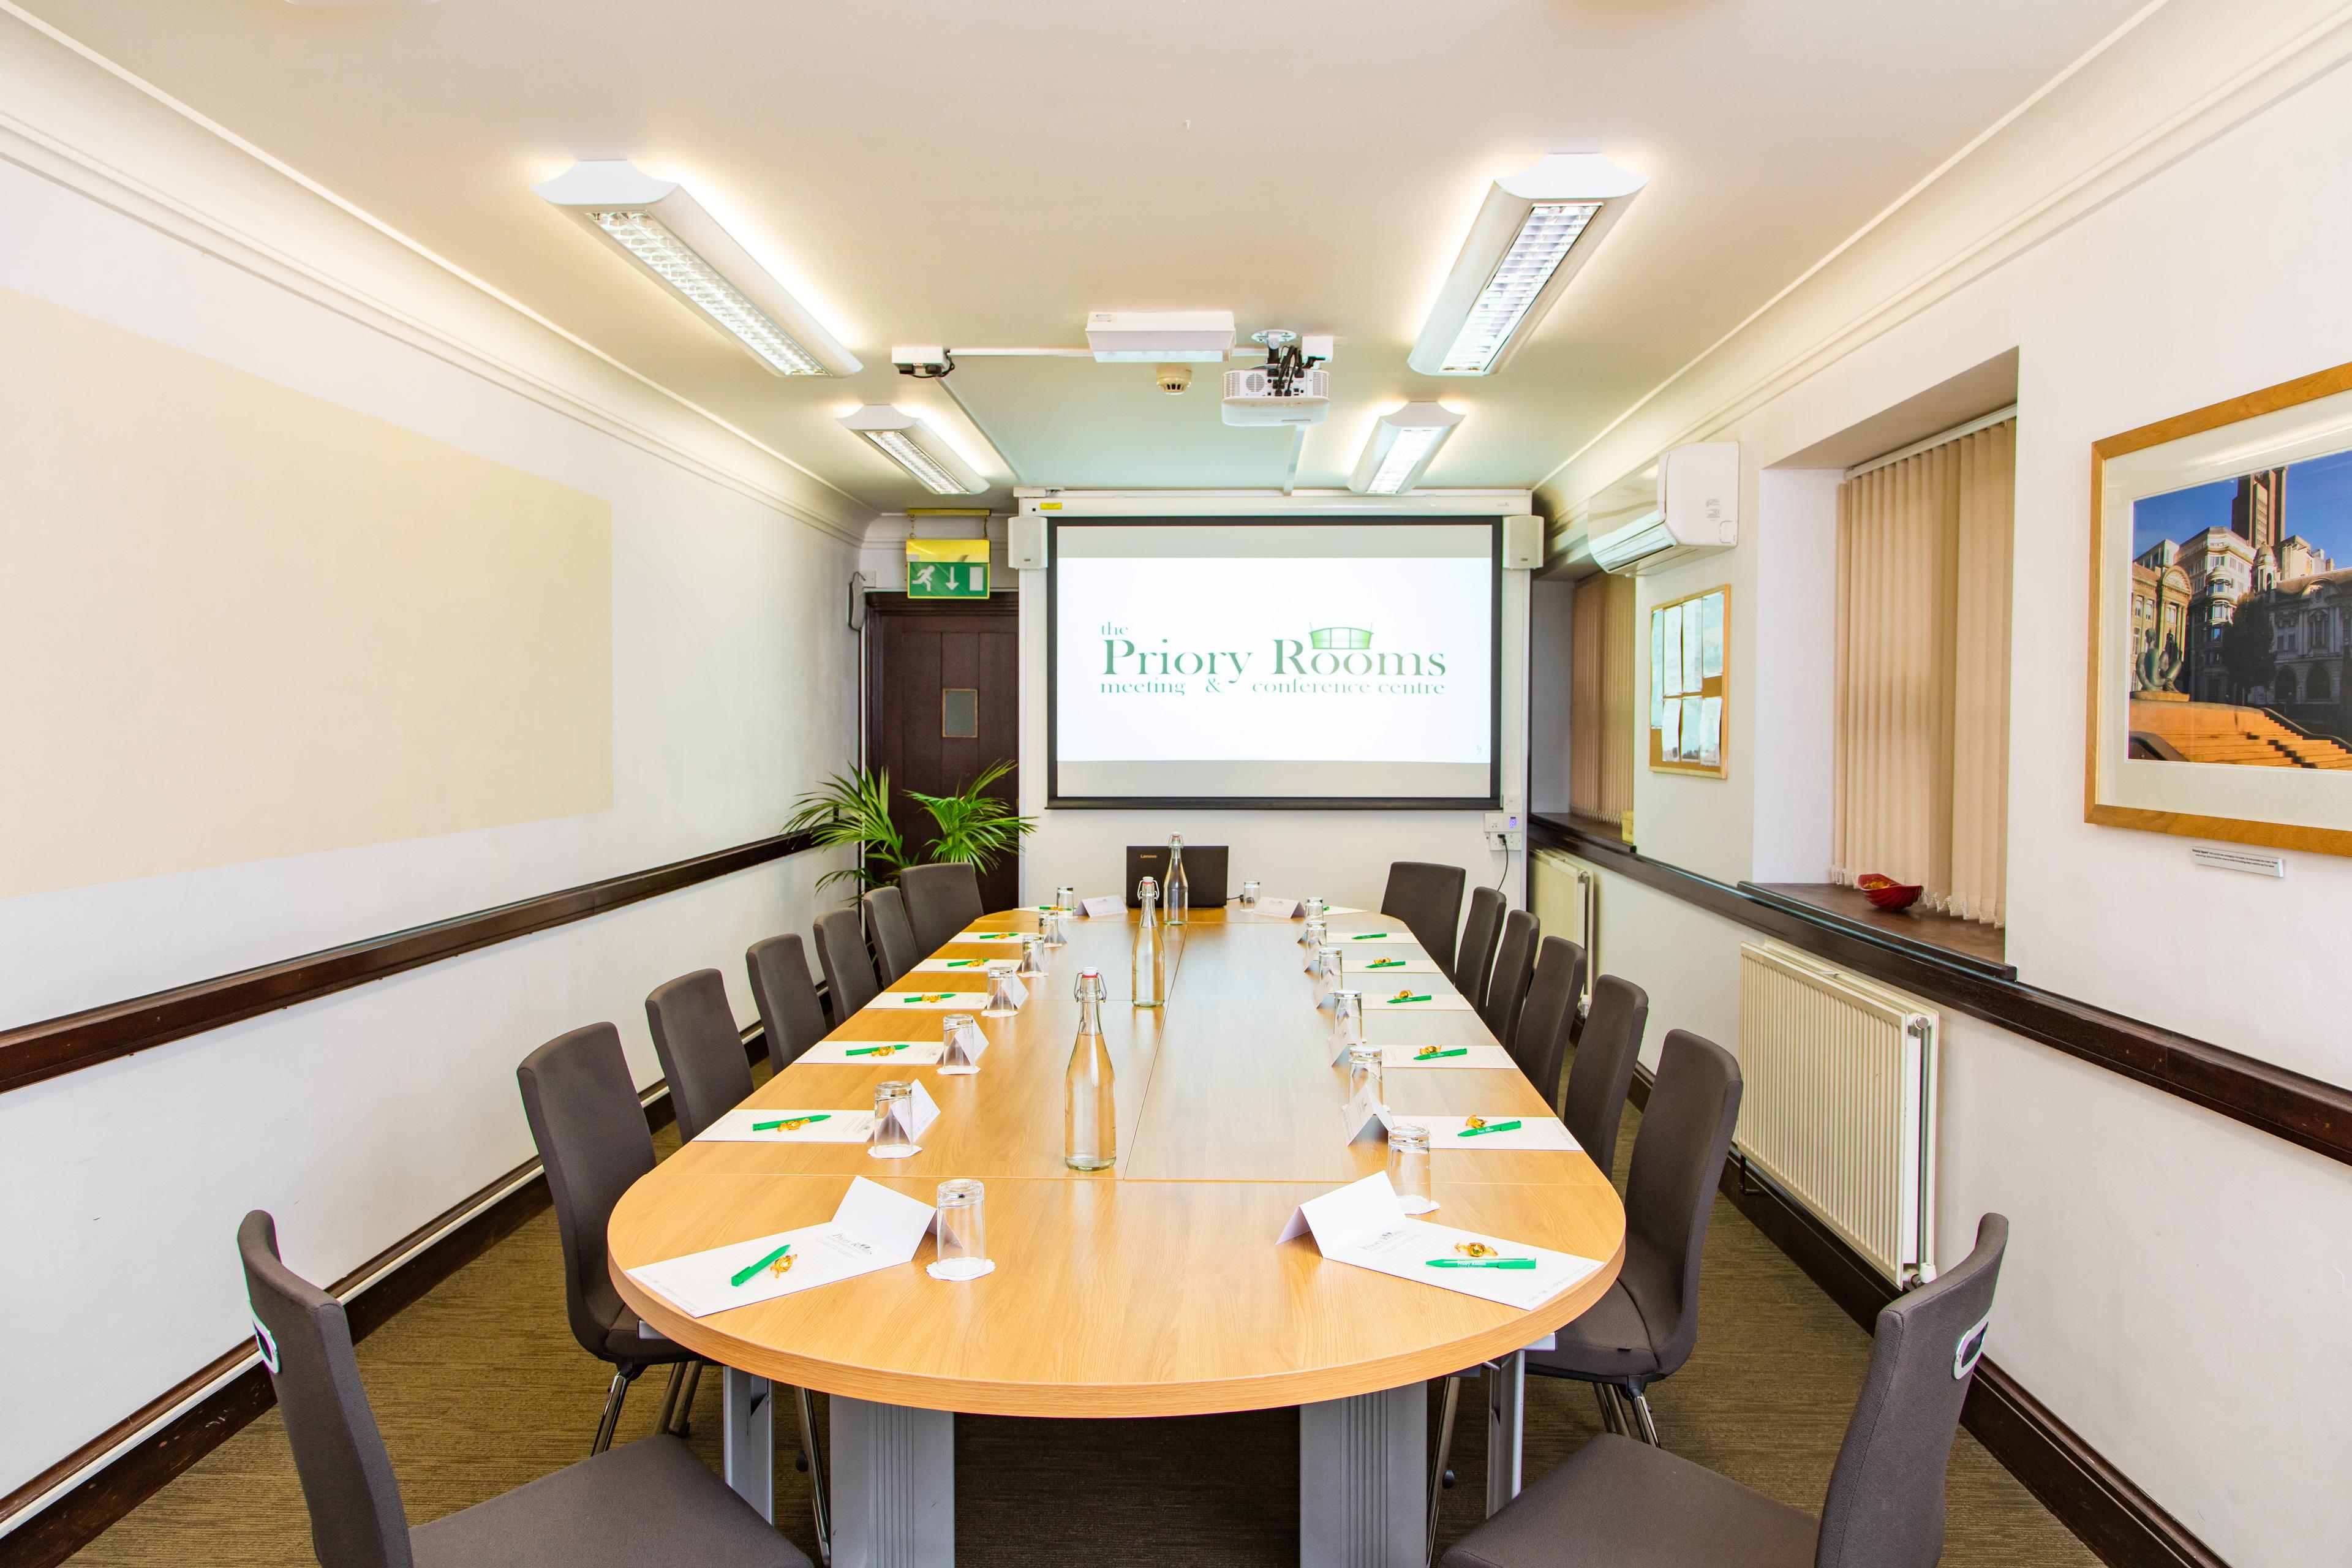 Lloyd Room, The Priory Rooms Meeting & Conference Centre photo #2